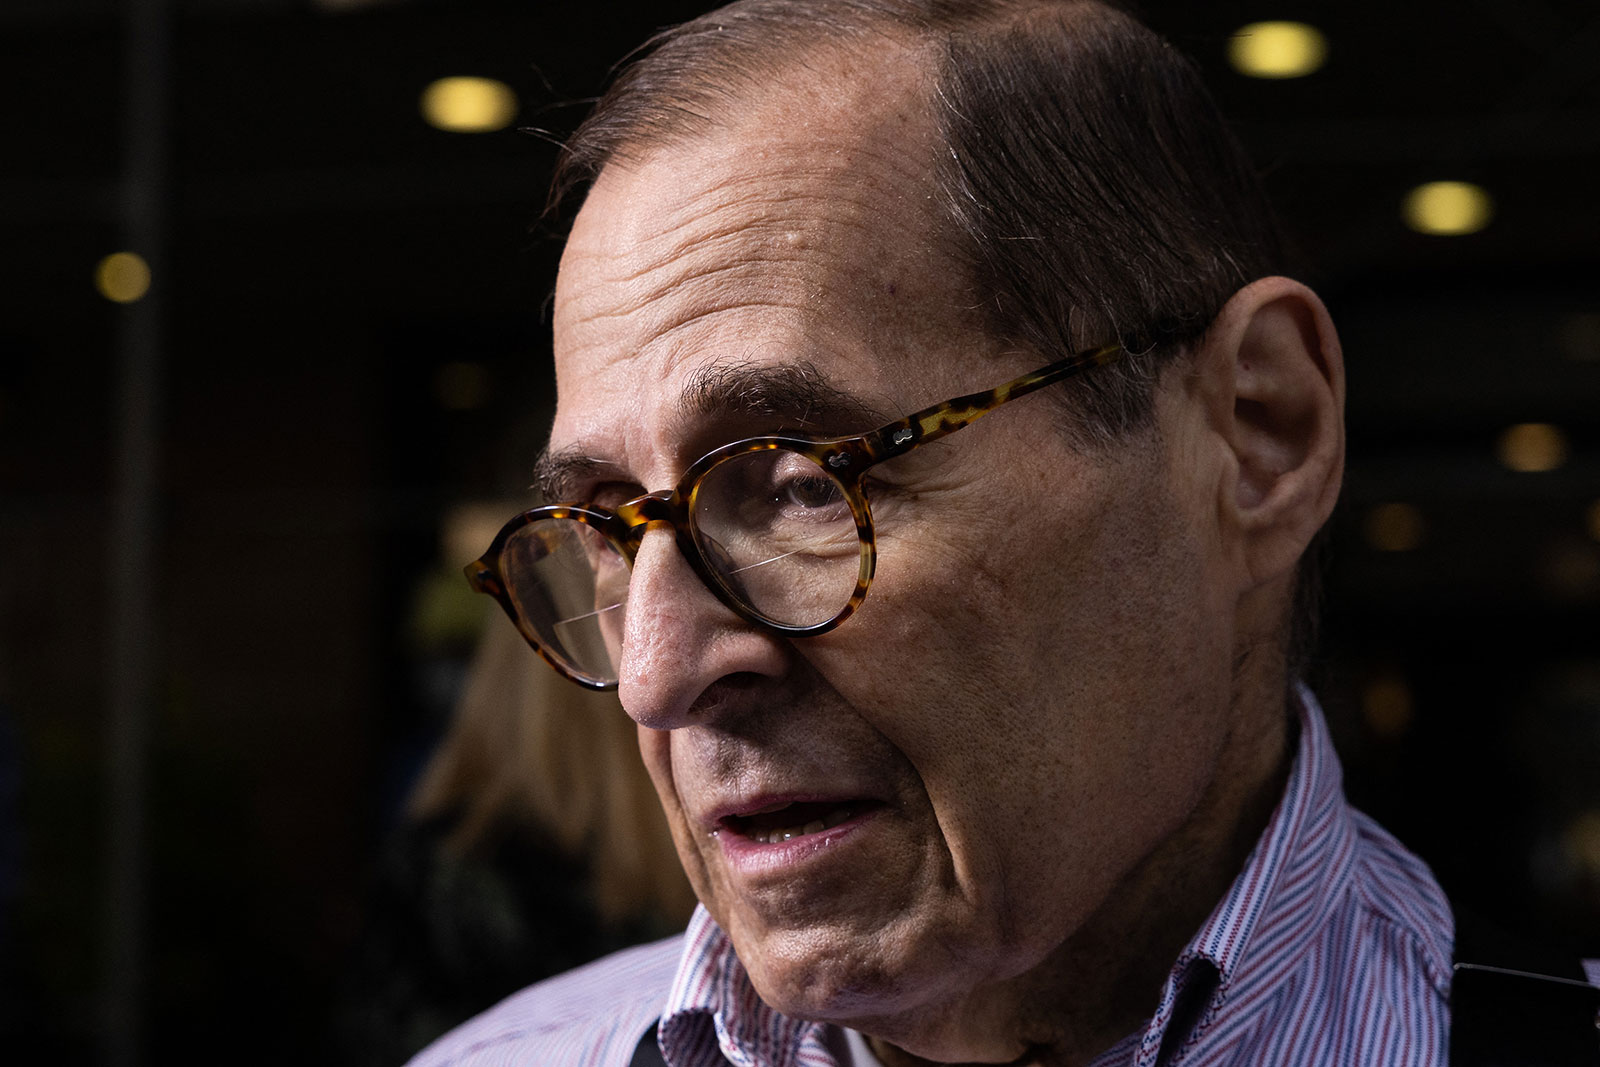 Rep. Jerry Nadler speaks to the press after voting in New York on Tuesday.